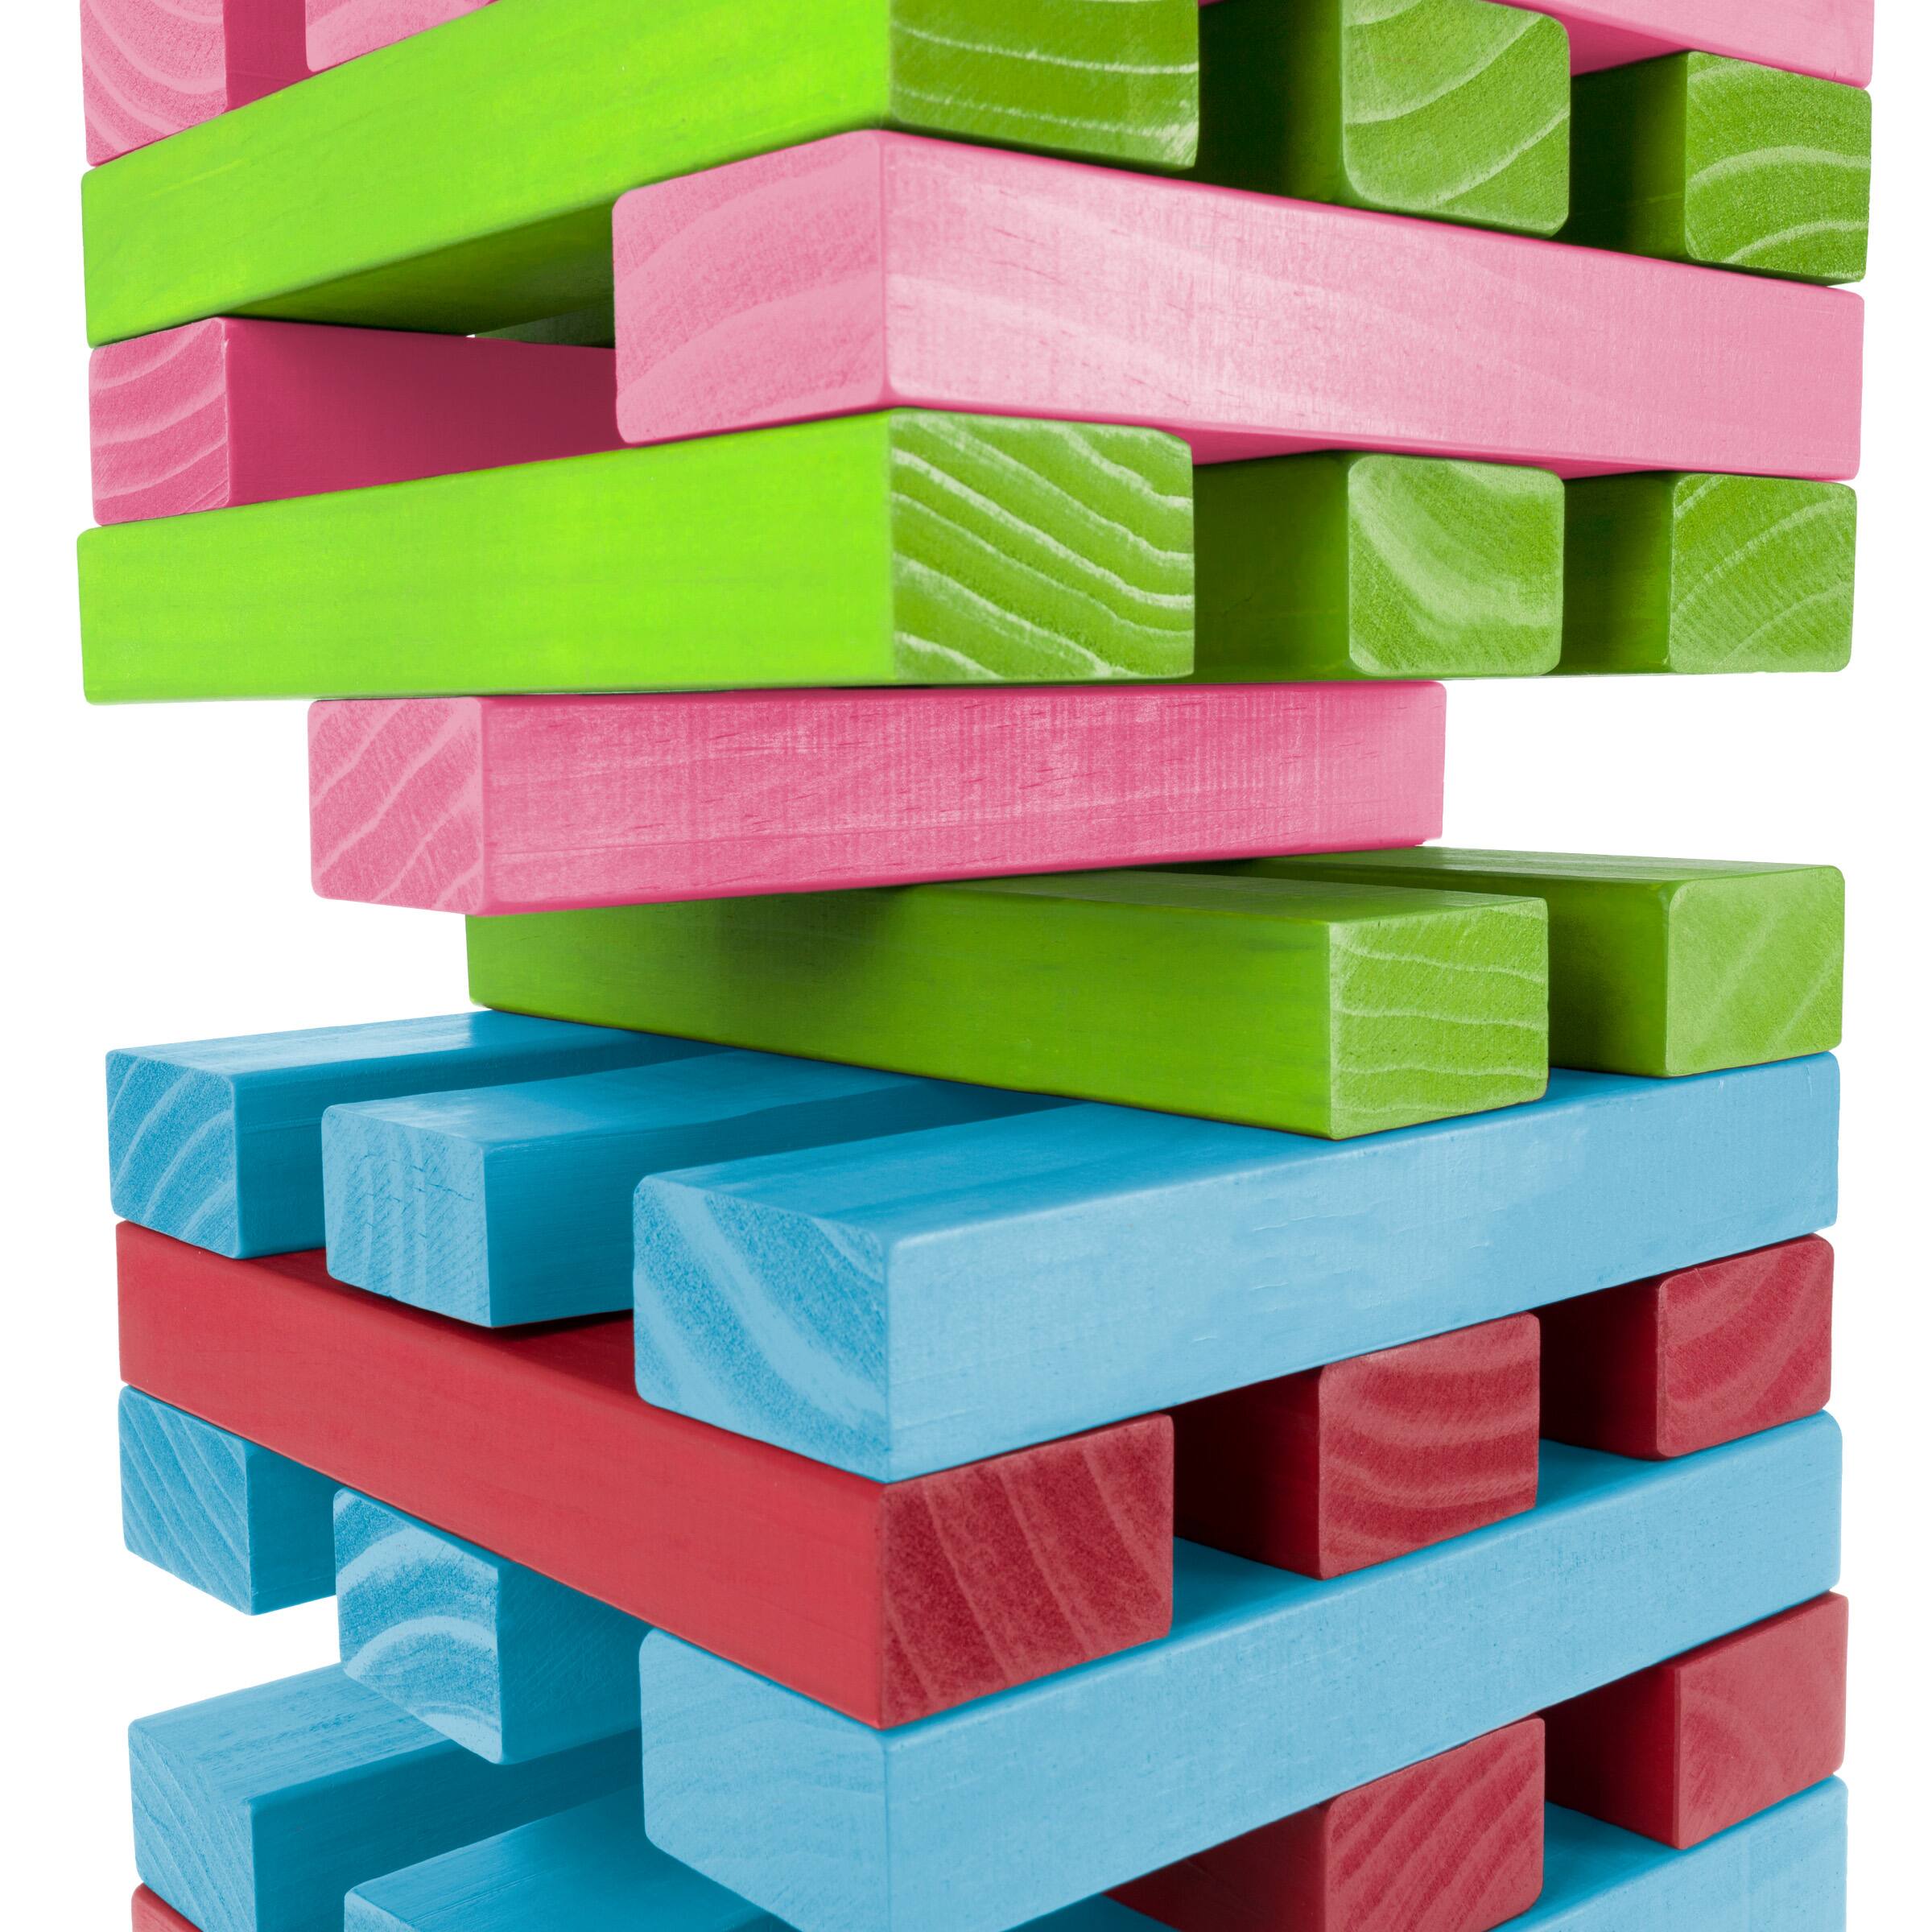 Toy Time Nontraditional Giant Wooden Blocks Tower Stacking Game